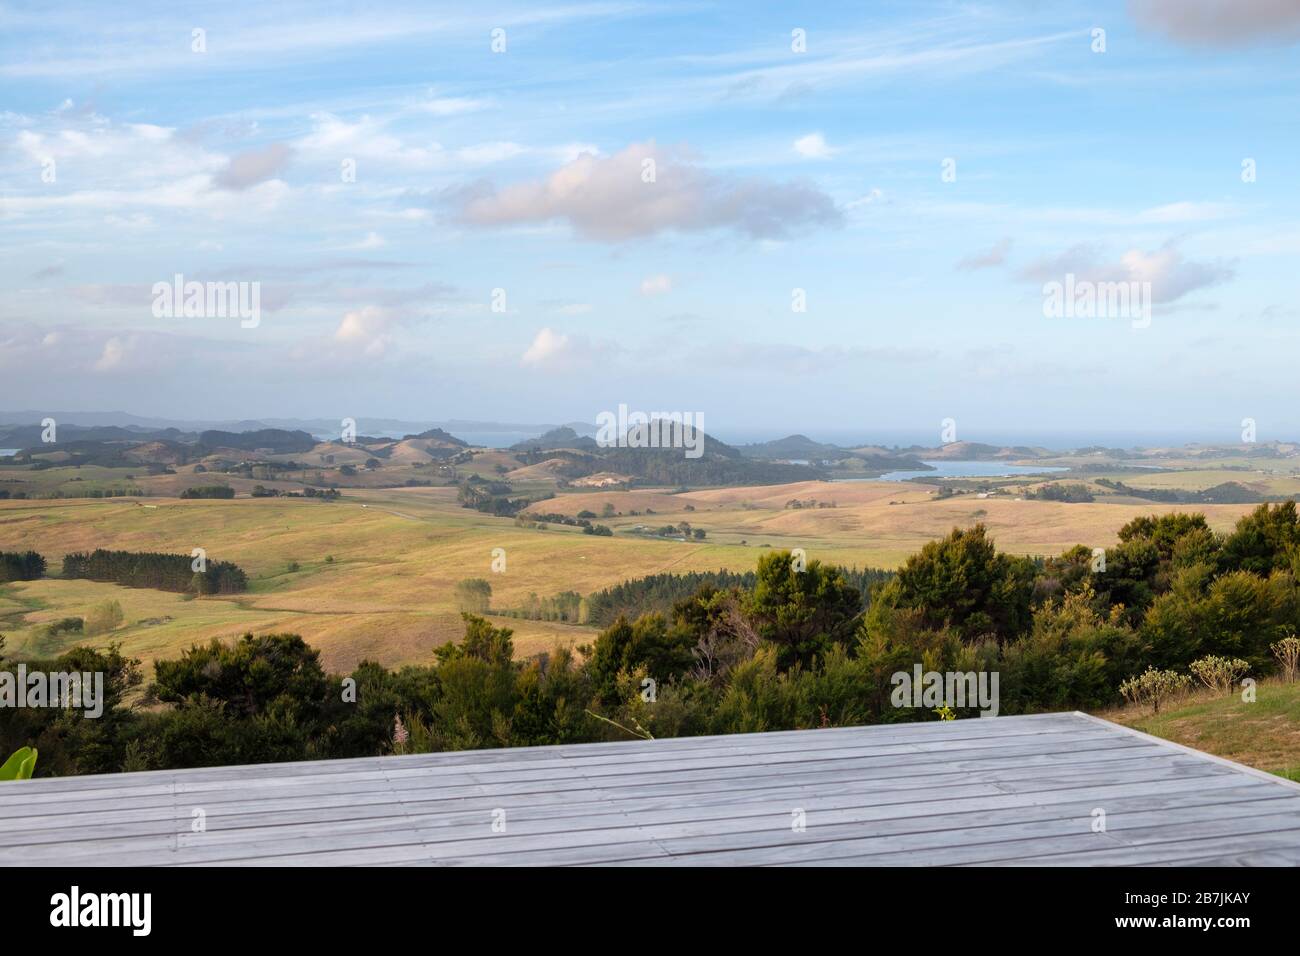 View from House Deck over landscape, Parua Bay near Whangarei, North Island, New Zealand Stock Photo